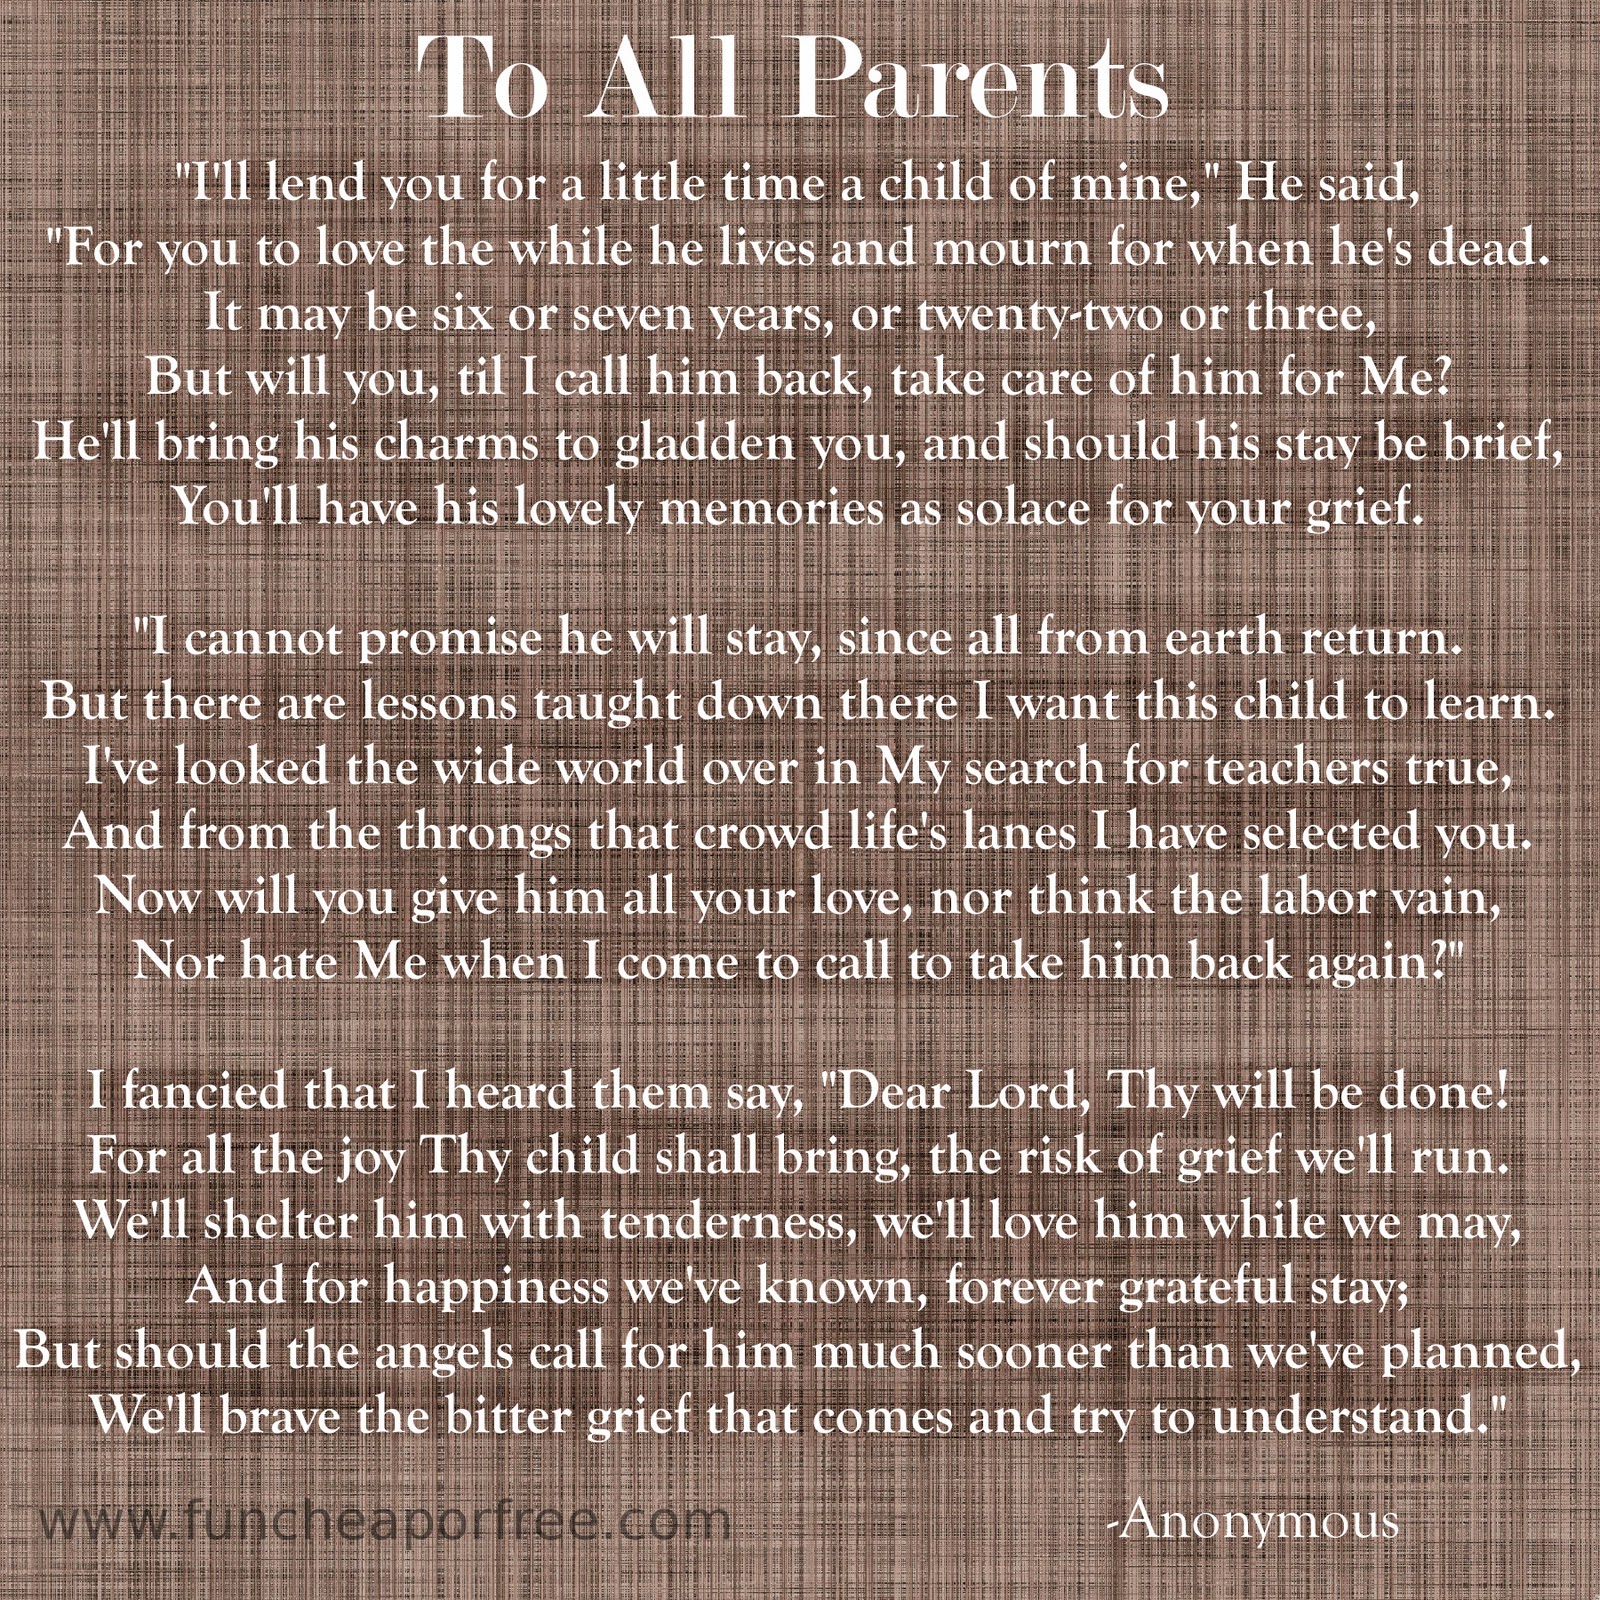 wanted to share this touching poem with you in hopes that it brings ...